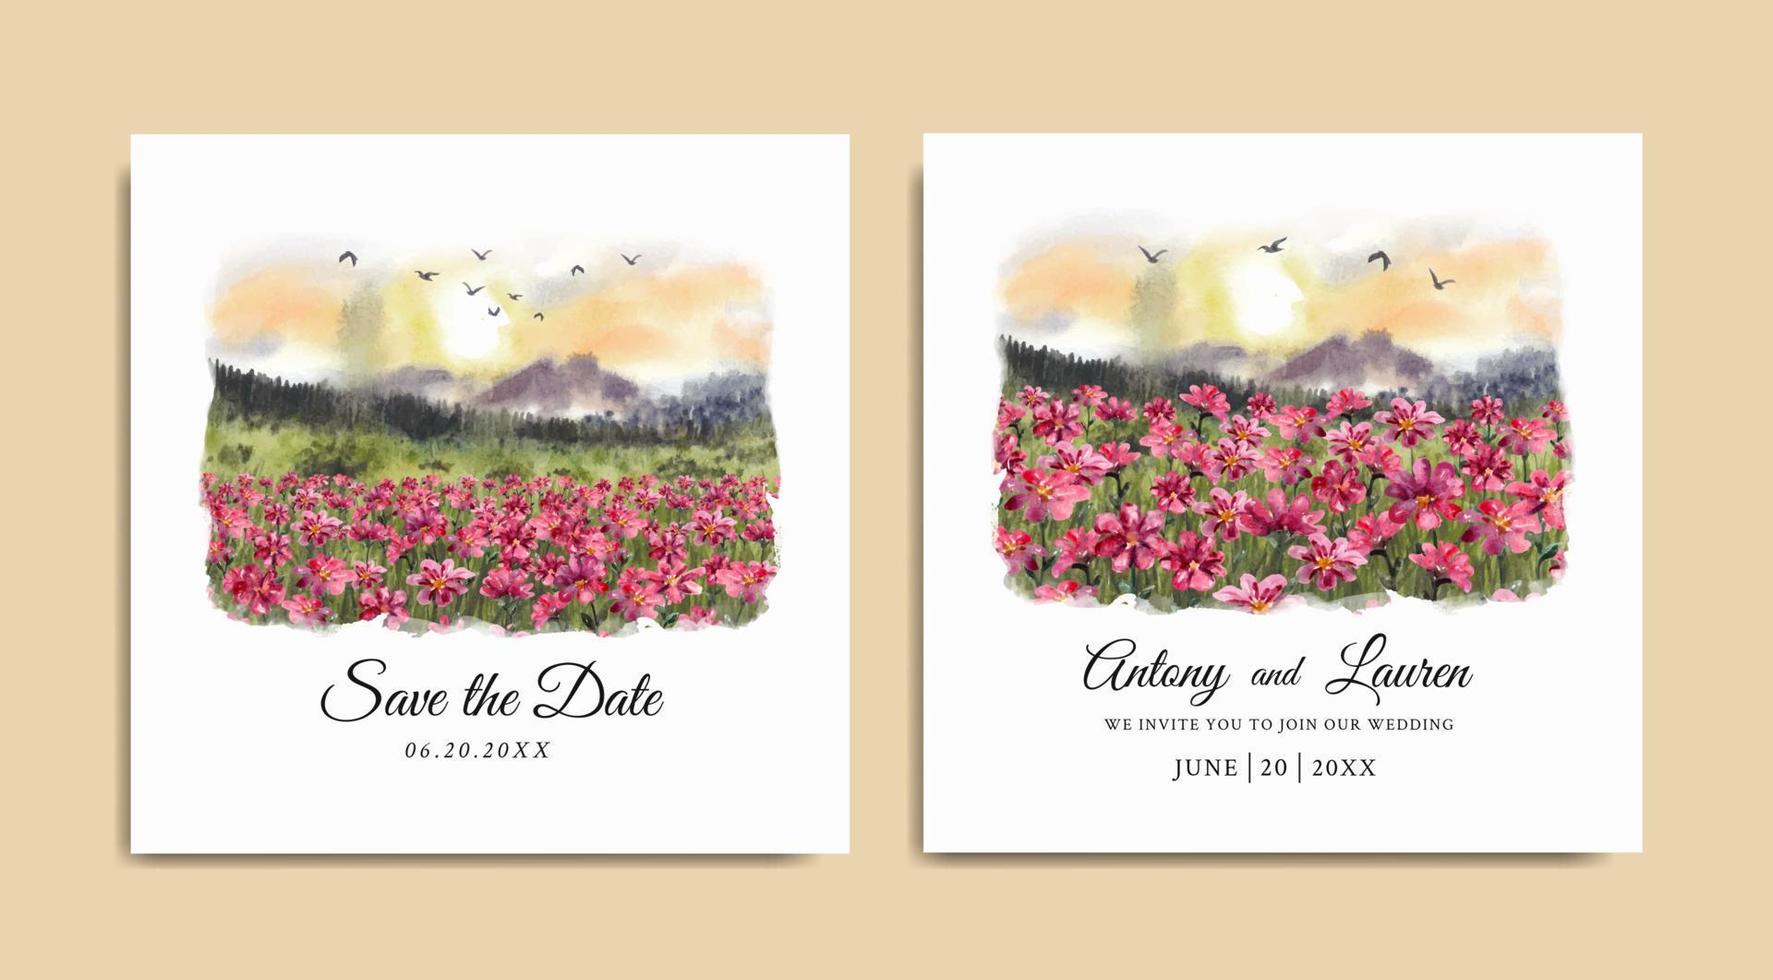 Wedding invitation of sunrise nature landscape with beautiful red flowers watercolor vector